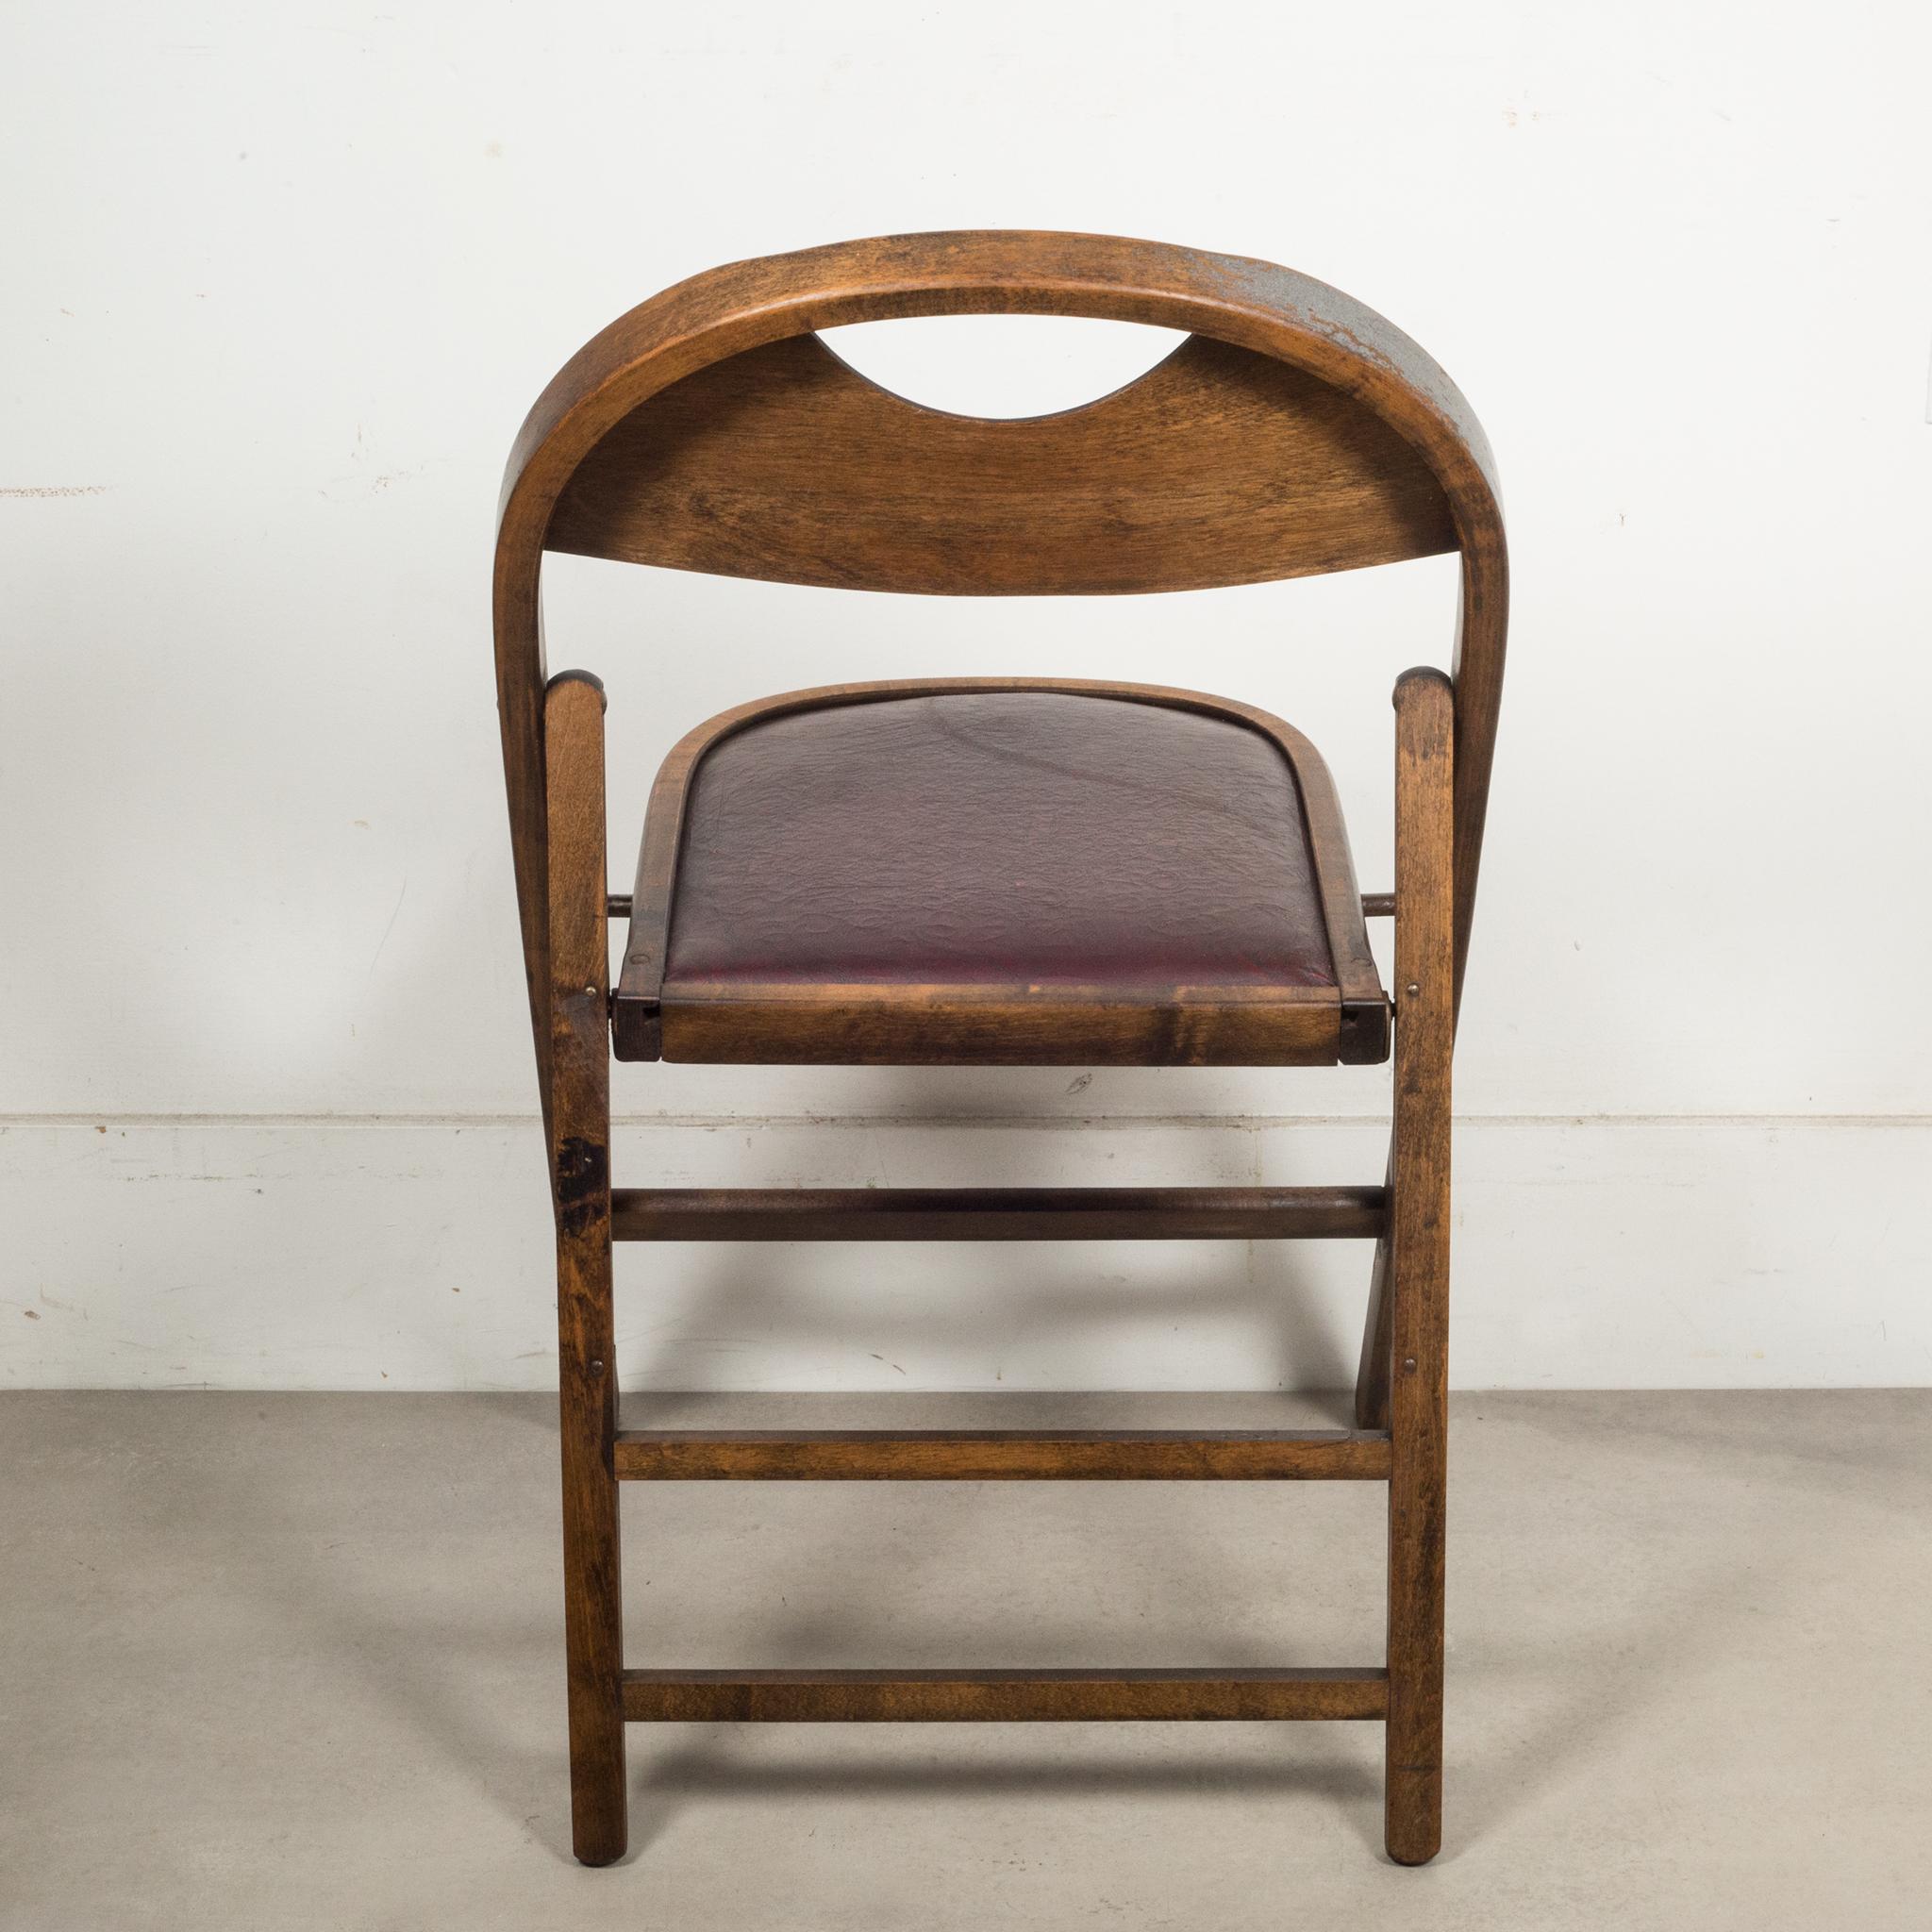 Wood Late 19th C./Early 20th C. Antique Acme Folding Chairs C.1890-1910